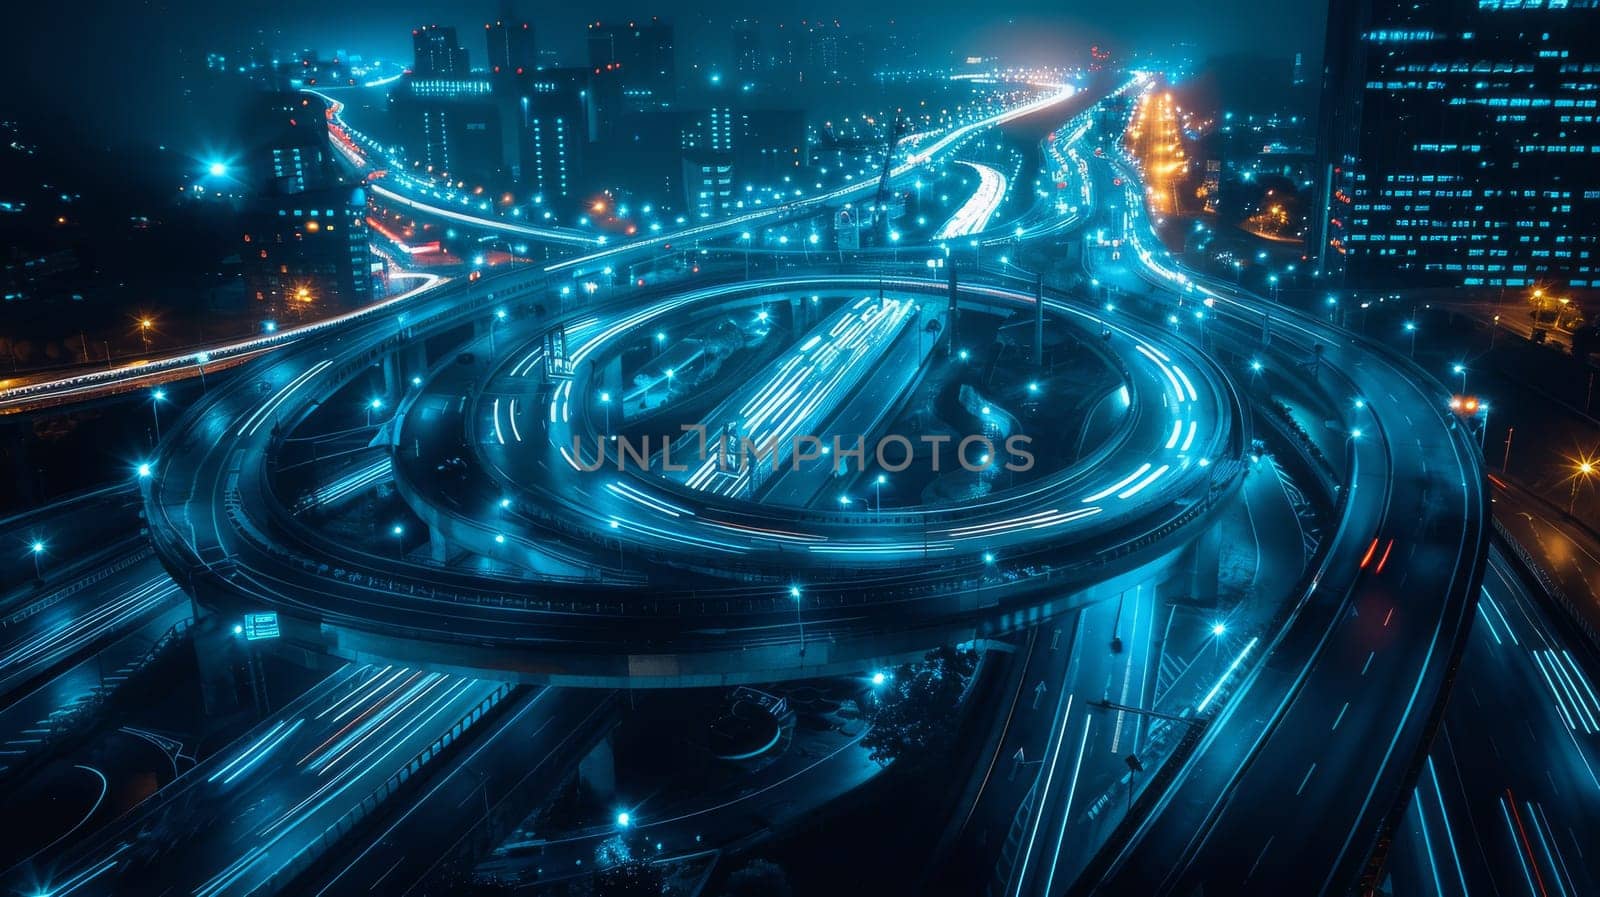 A city at night with a large round highway in the middle. The highway is lit up with blue lights